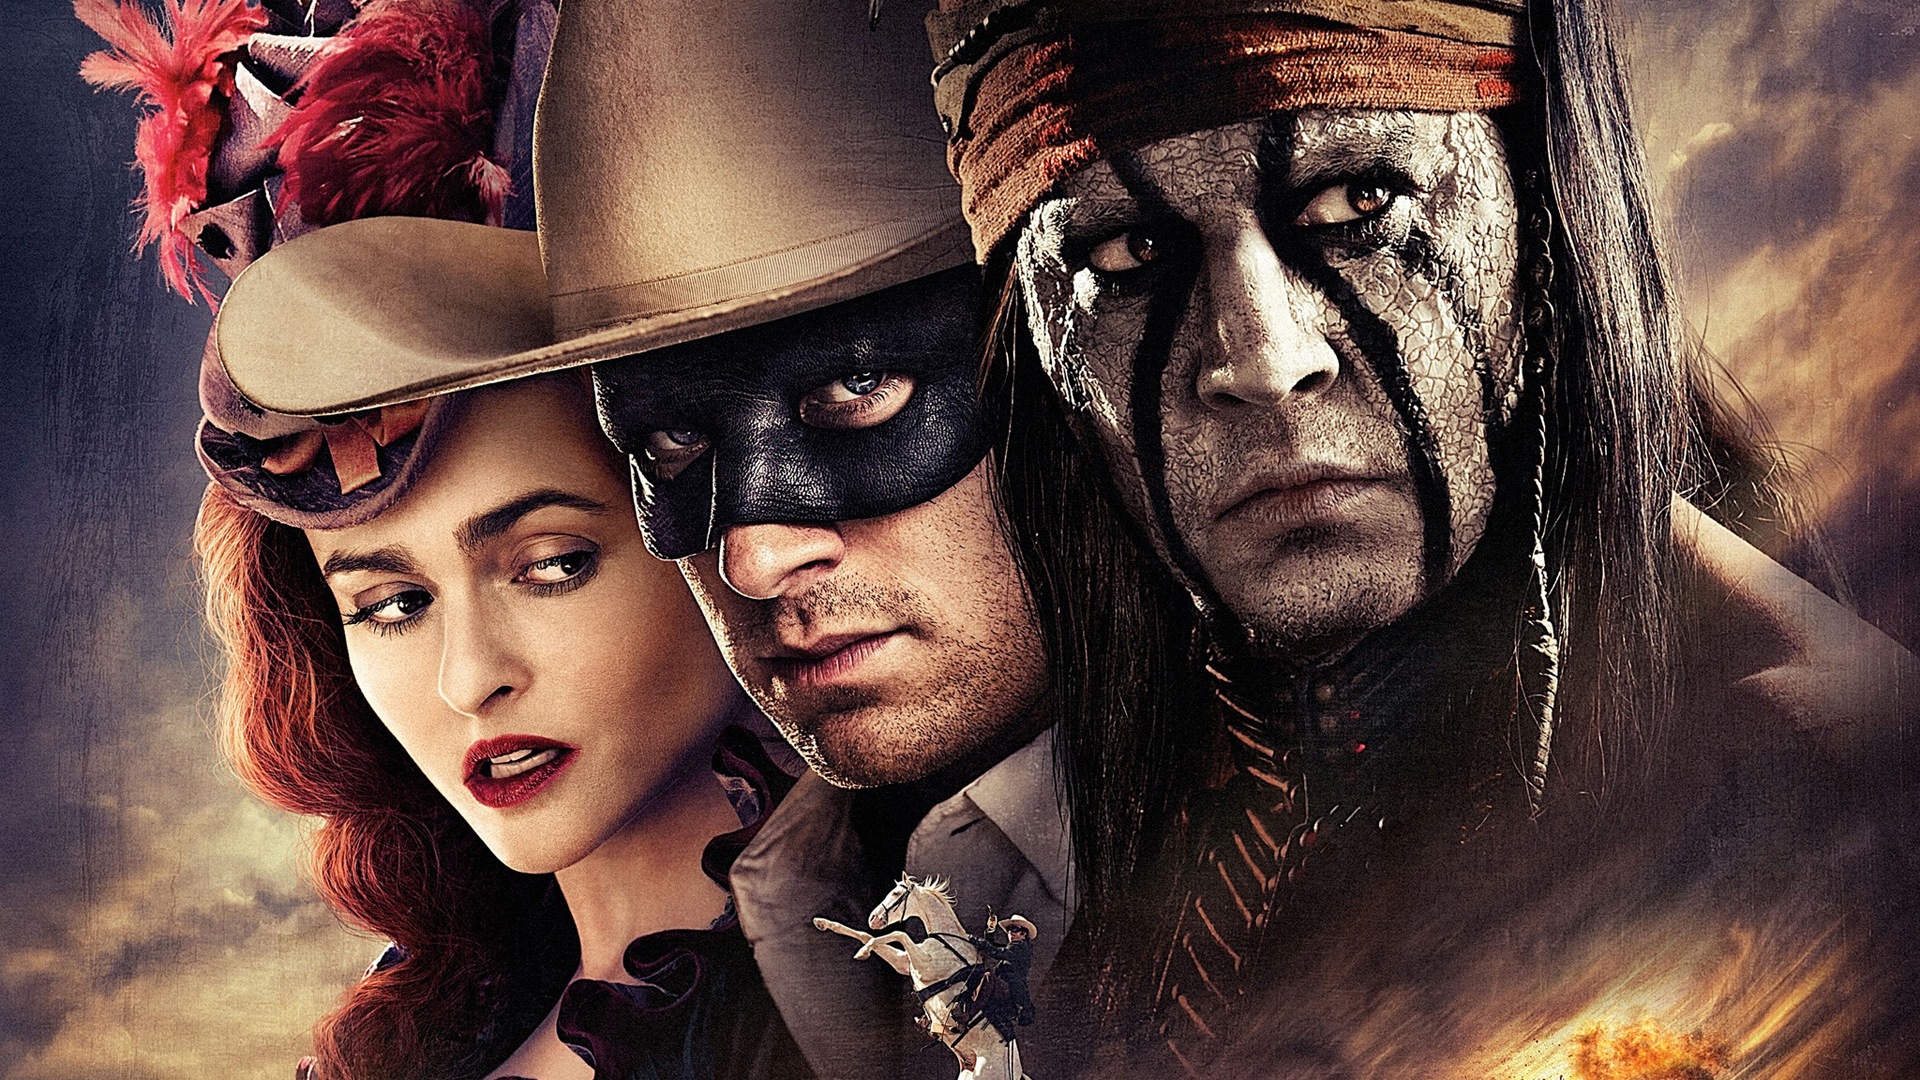 The Lone Ranger HD movie wallpapers #1 - 1920x1080